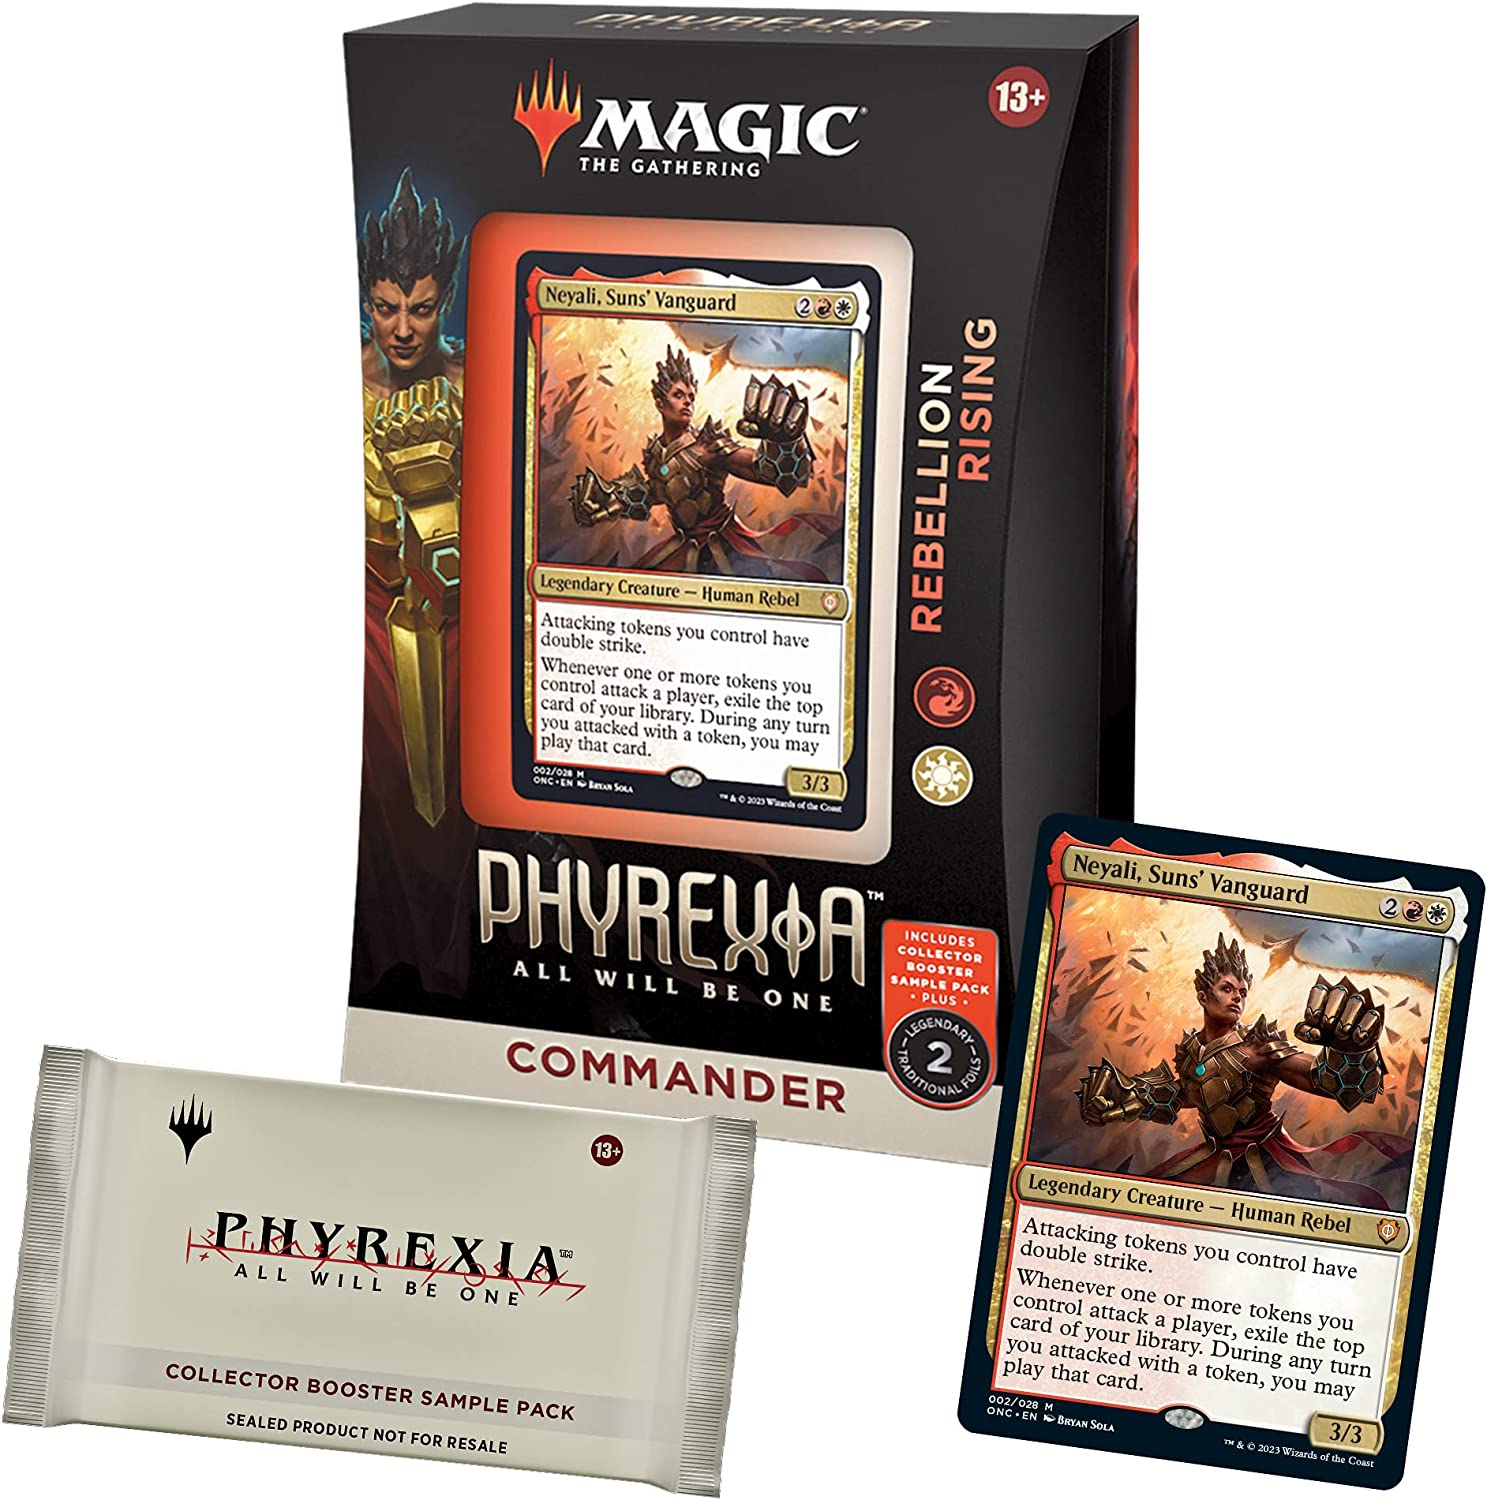 Commander Phyrexia All will be one - rebellion rissing